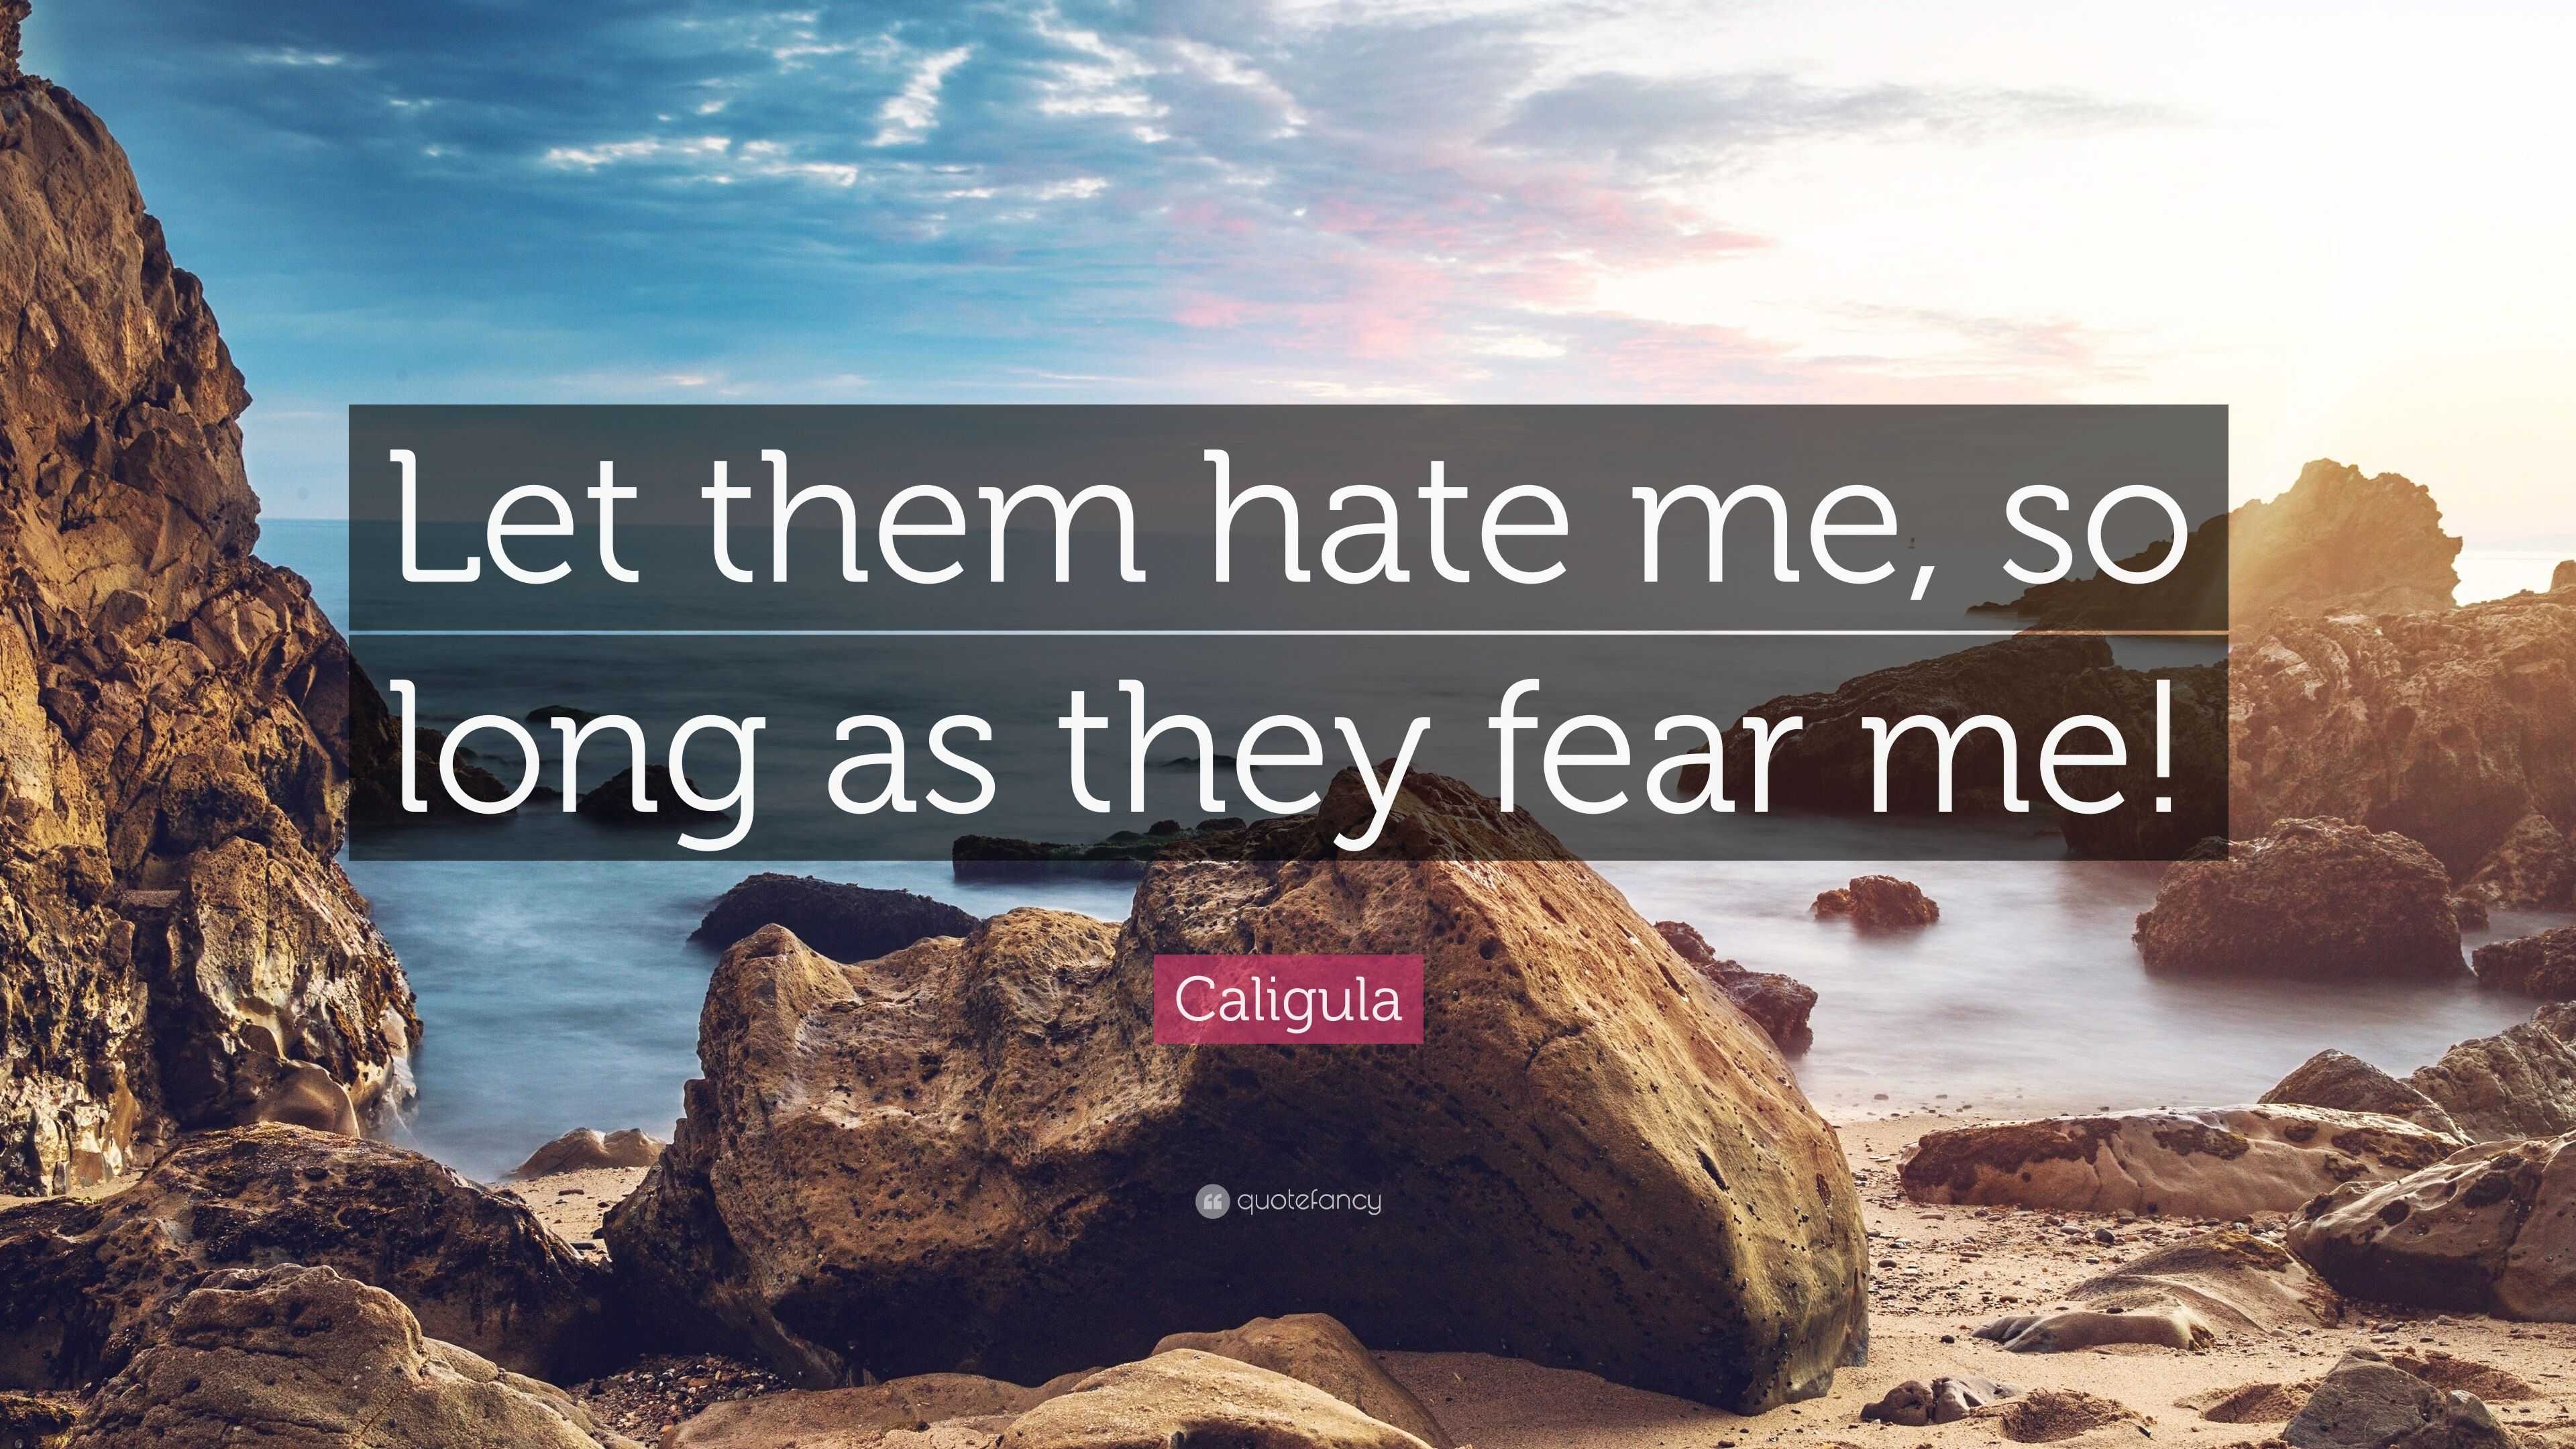 Caligula Quote: "Let them hate me, so long as they fear me!" (12 wallpapers) - Quotefancy